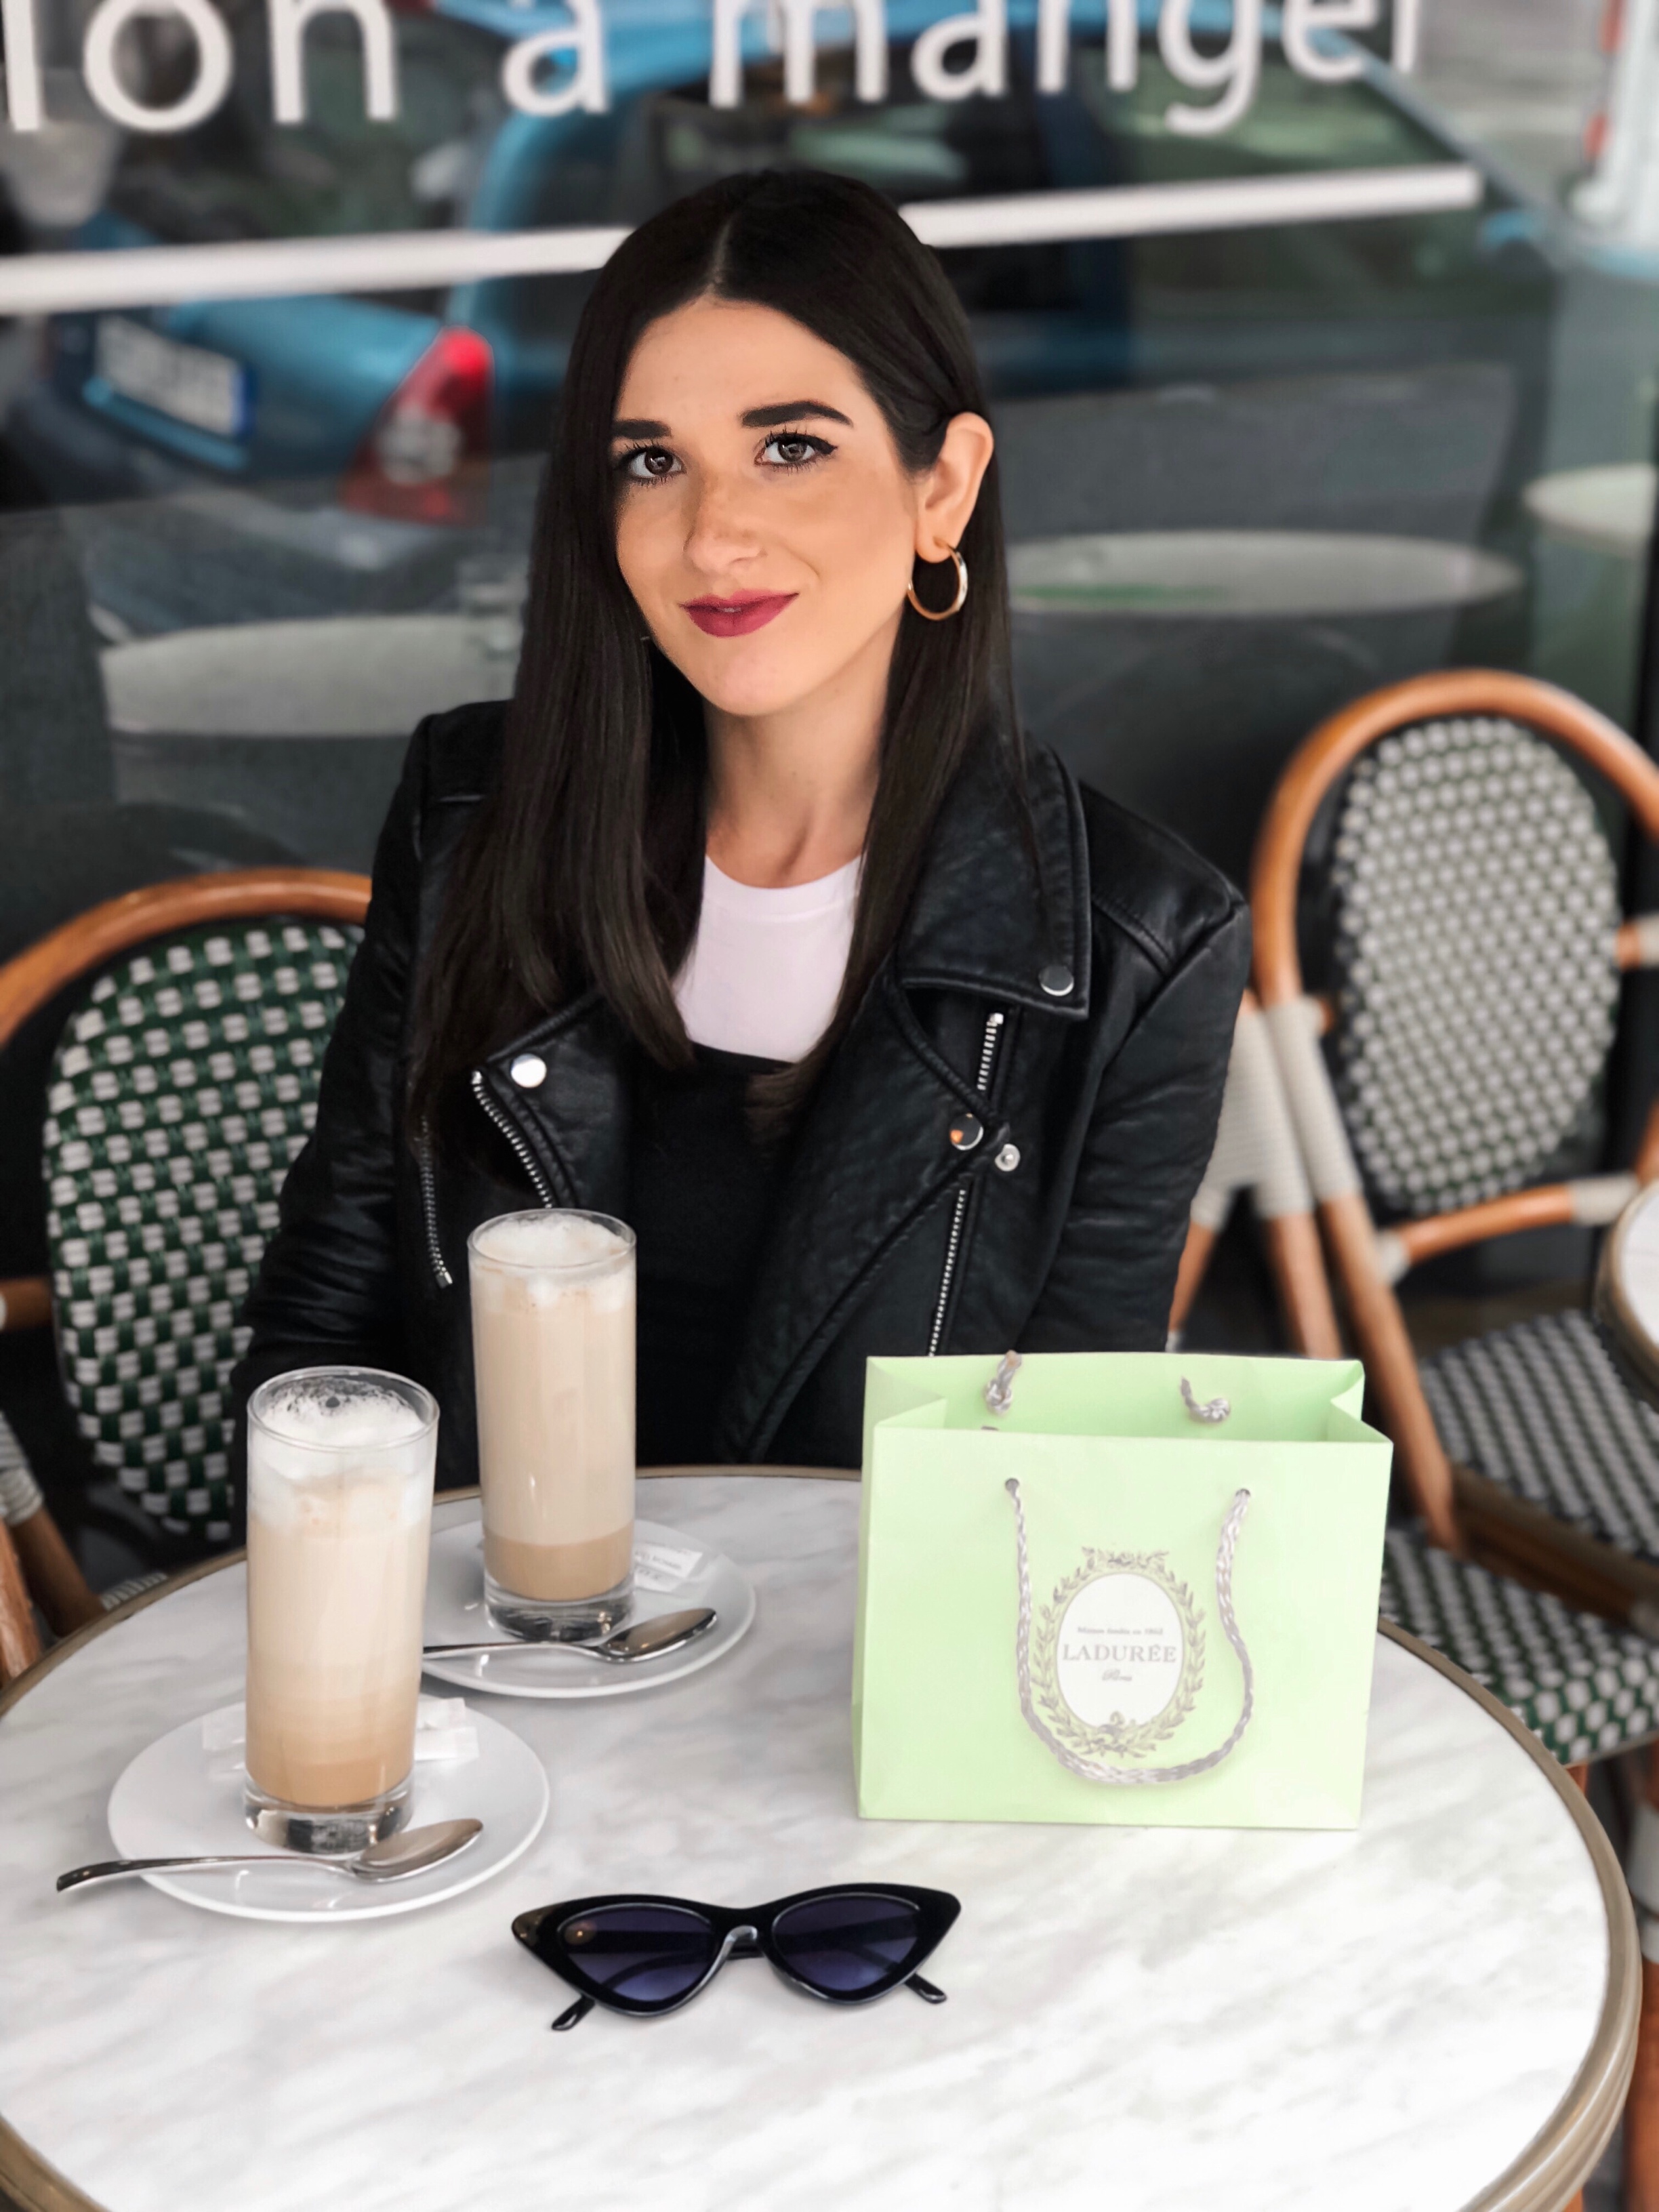 Coffee Talk :: Why Don't You Have Kids Yet? Esther Santer Fashion Blog NYC Street Style Blogger New York City Serious Life Issues Topics Chat Support Family Important Inspiring Sensitivity Pregnancy Journey Struggles.jpg